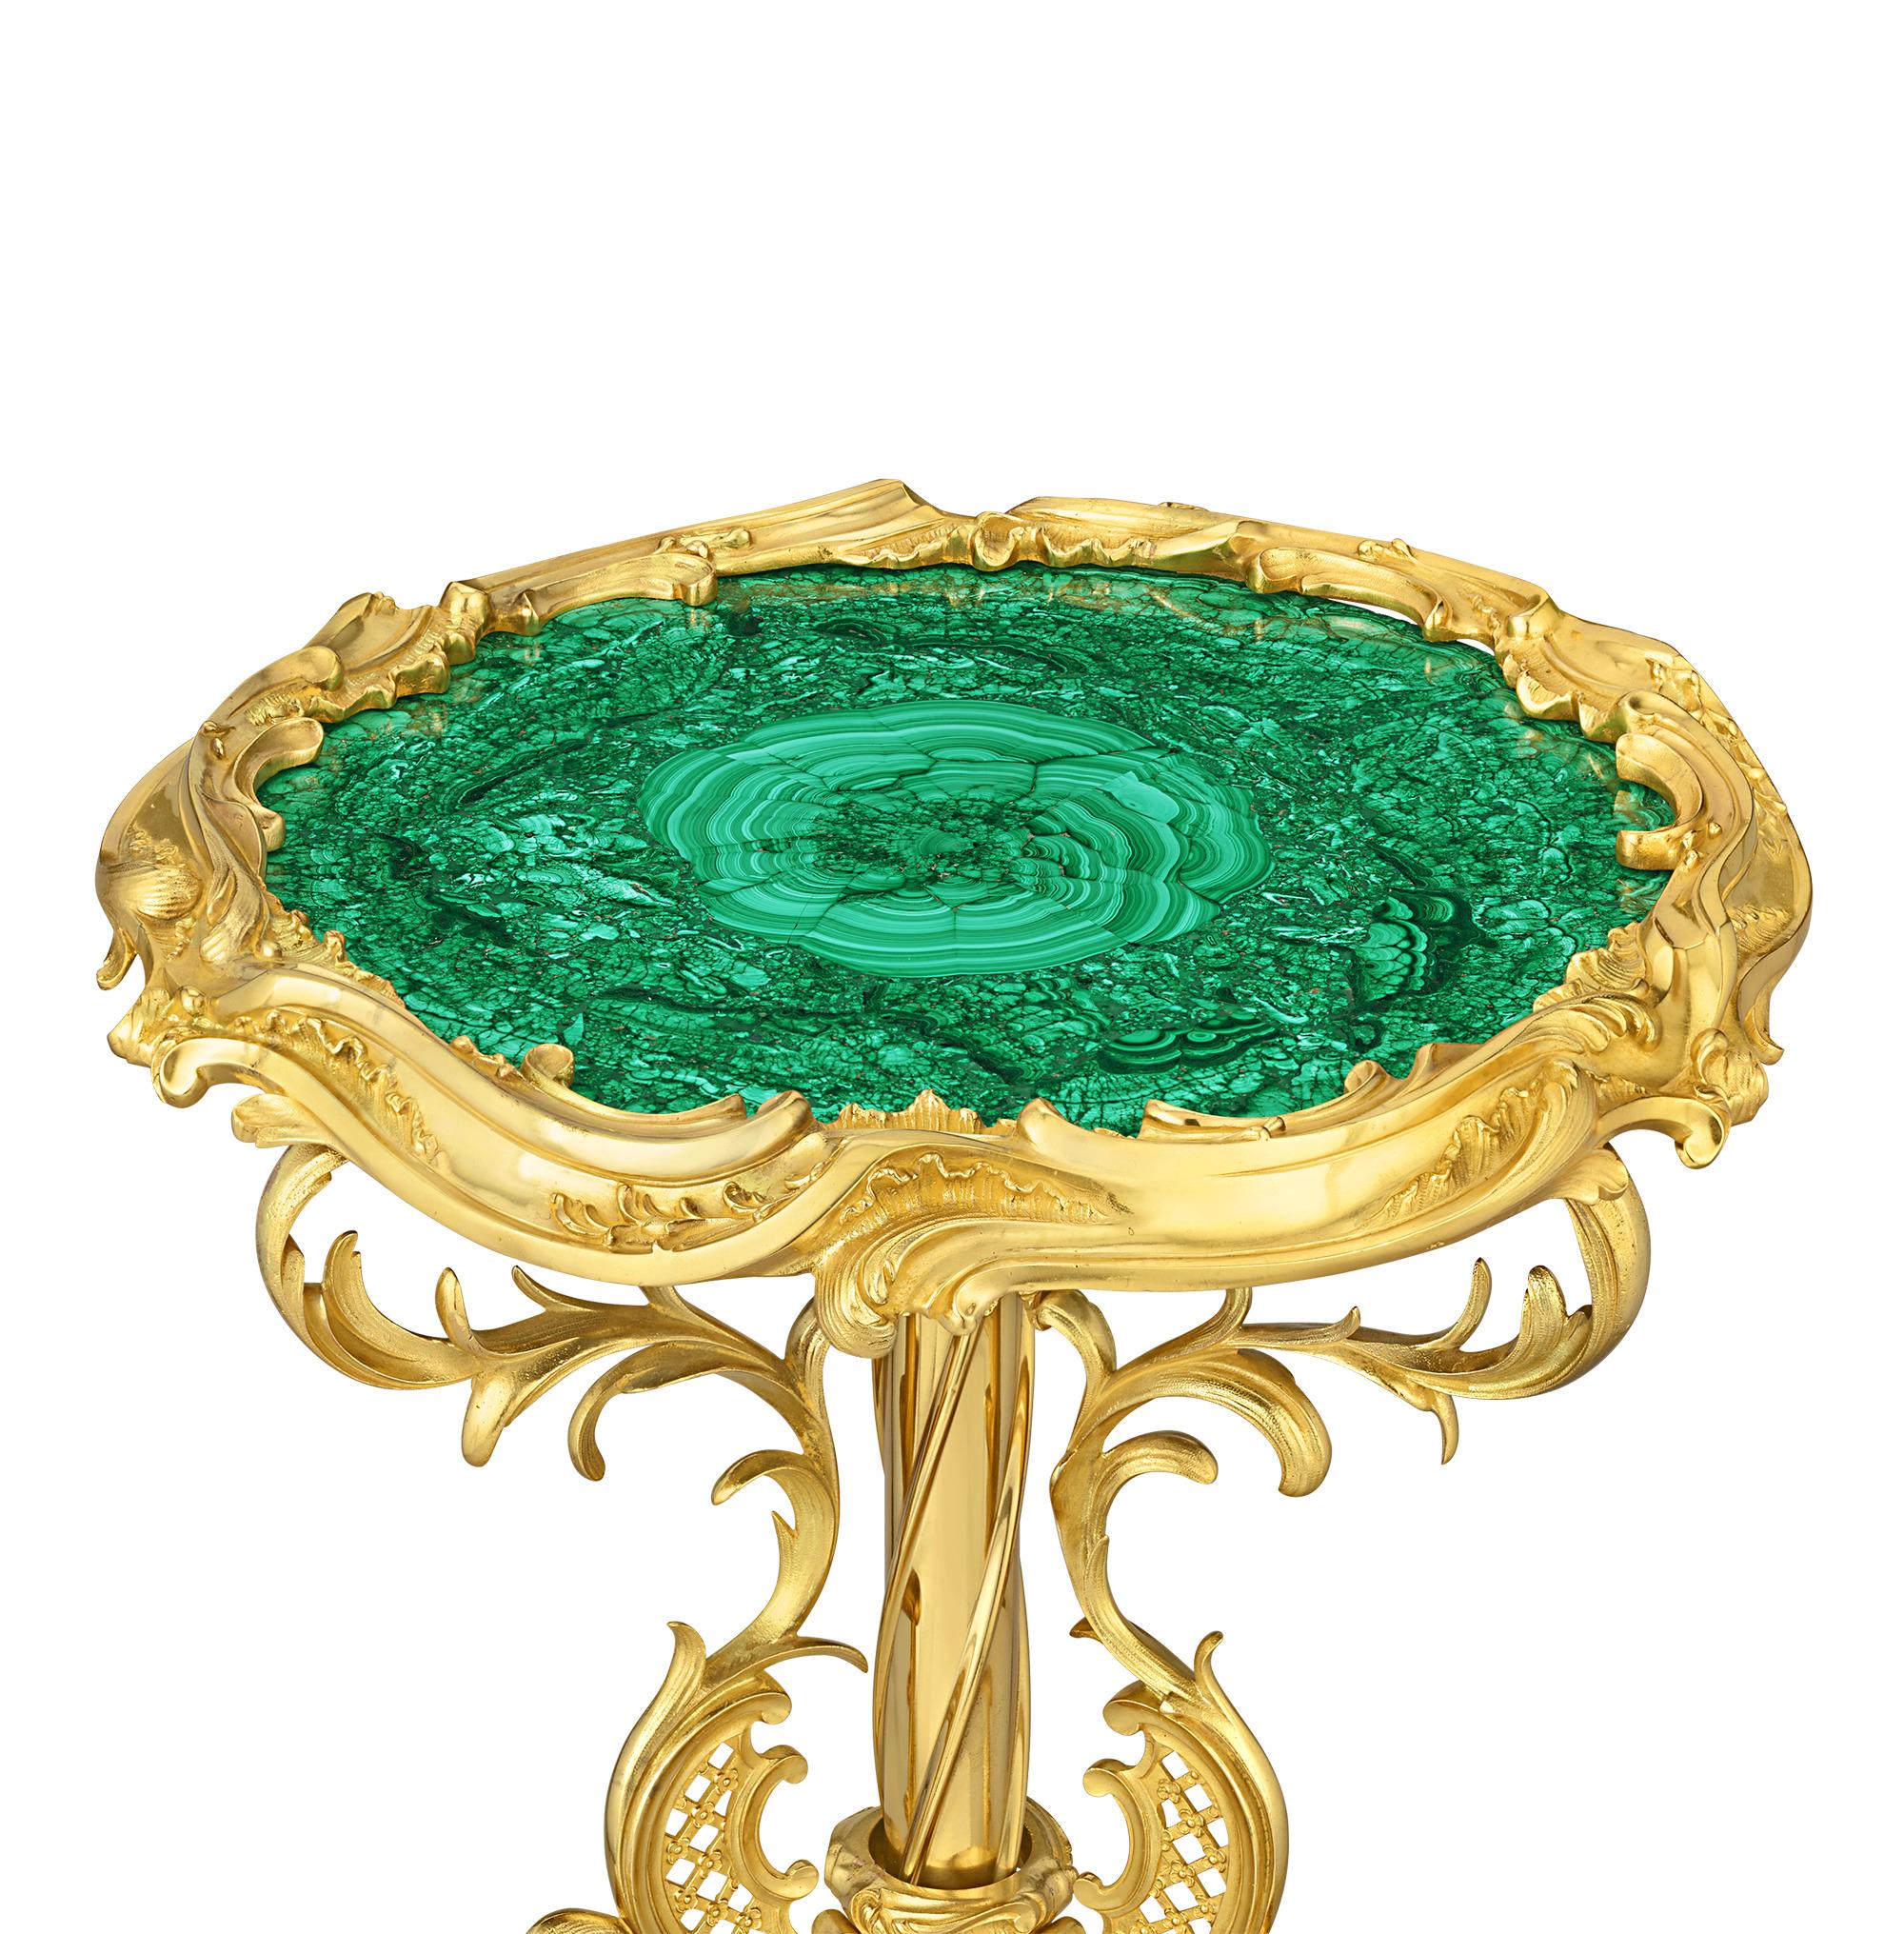 This magnificent 19th-century Russian gueridon is crafted from striking green malachite and gilt bronze. A beautiful museum-quality work, the stunning green malachite table top is set within an exquisitely sculpted 